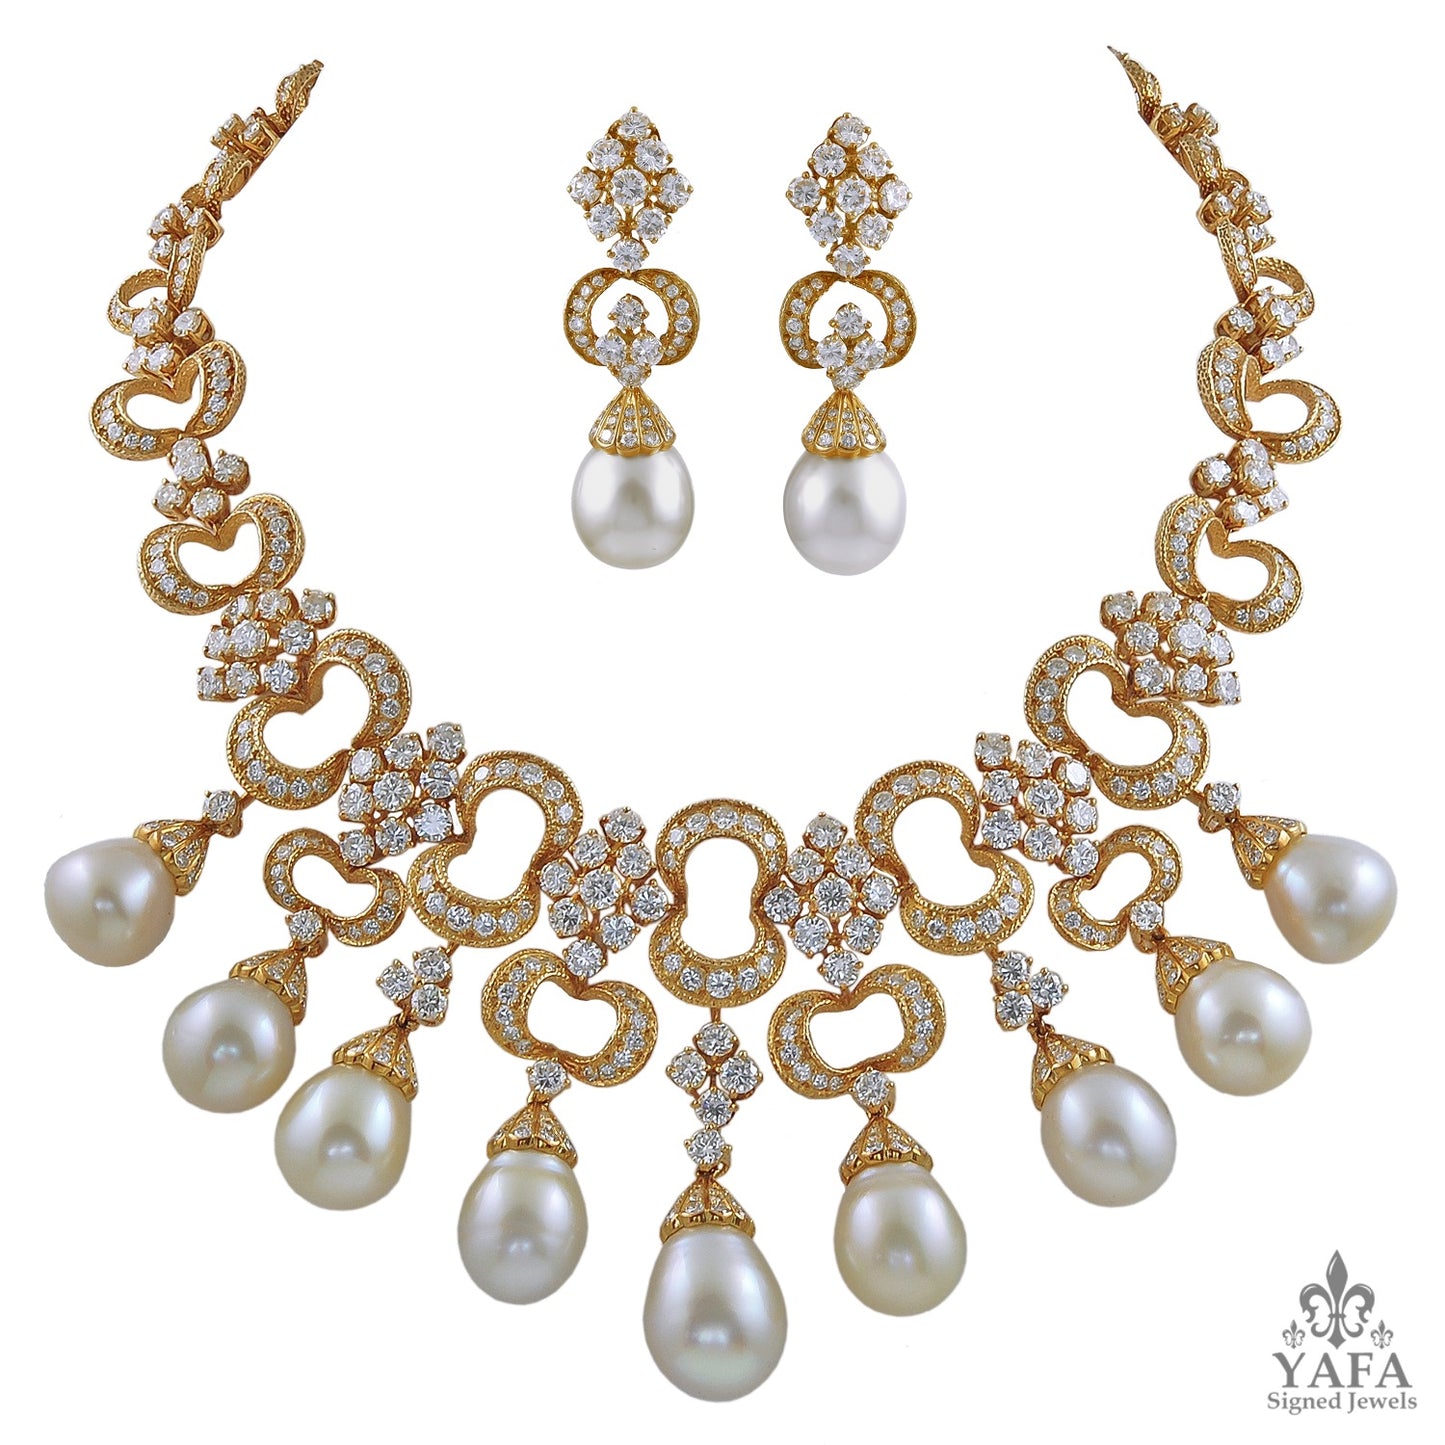 Rocaille-Style Pearl Diamond Fringe Necklace Earrings Suite